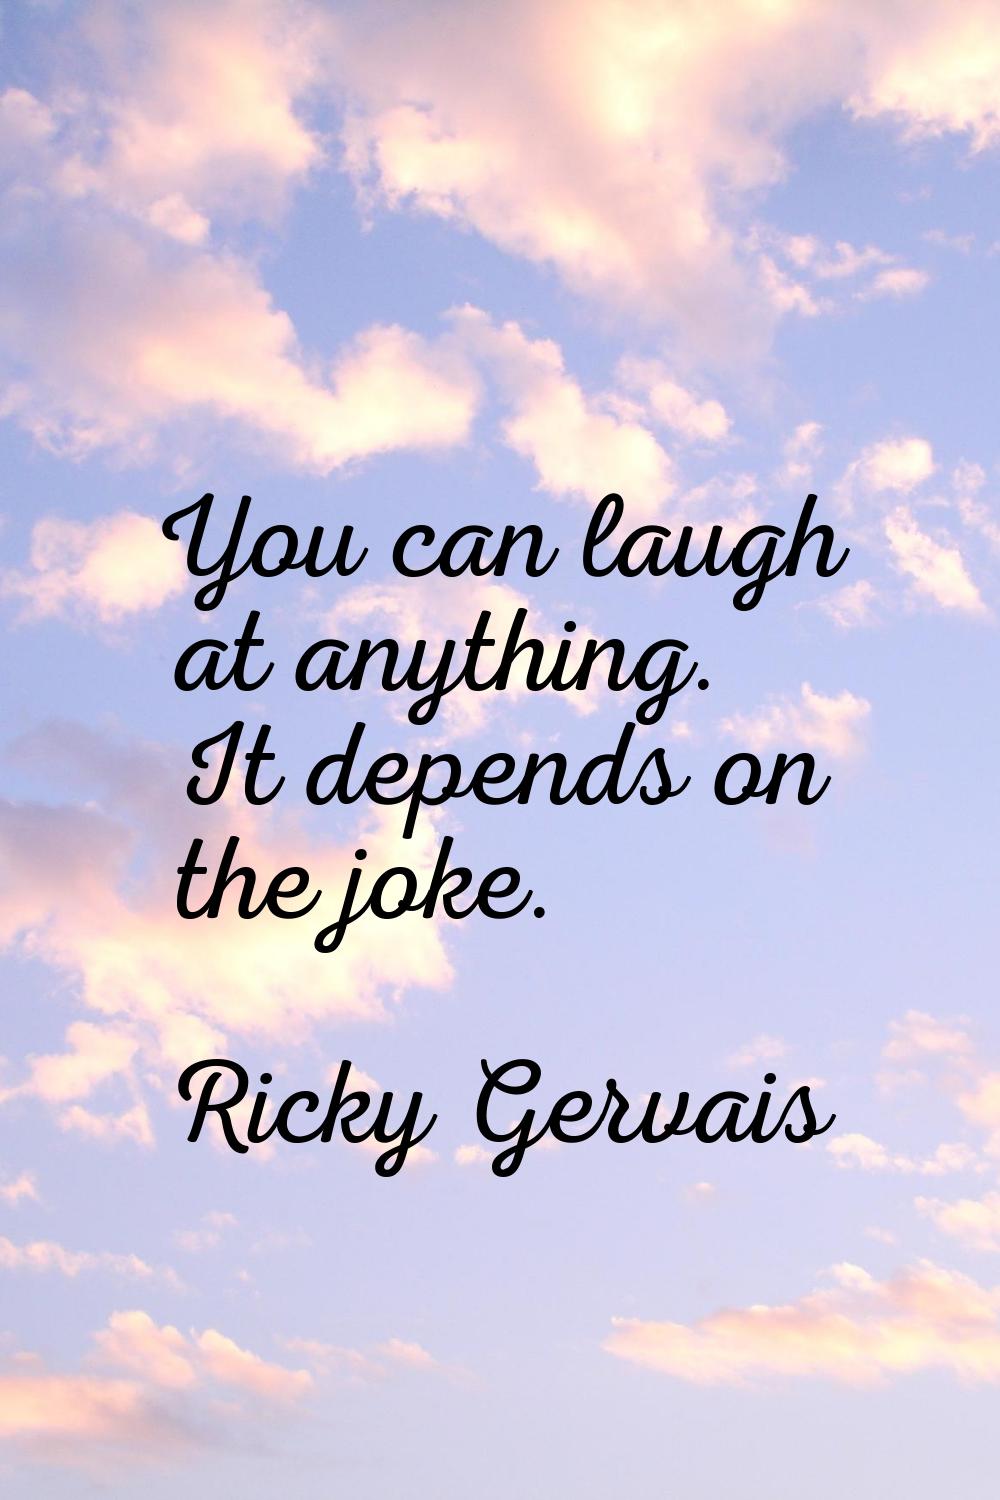 You can laugh at anything. It depends on the joke.